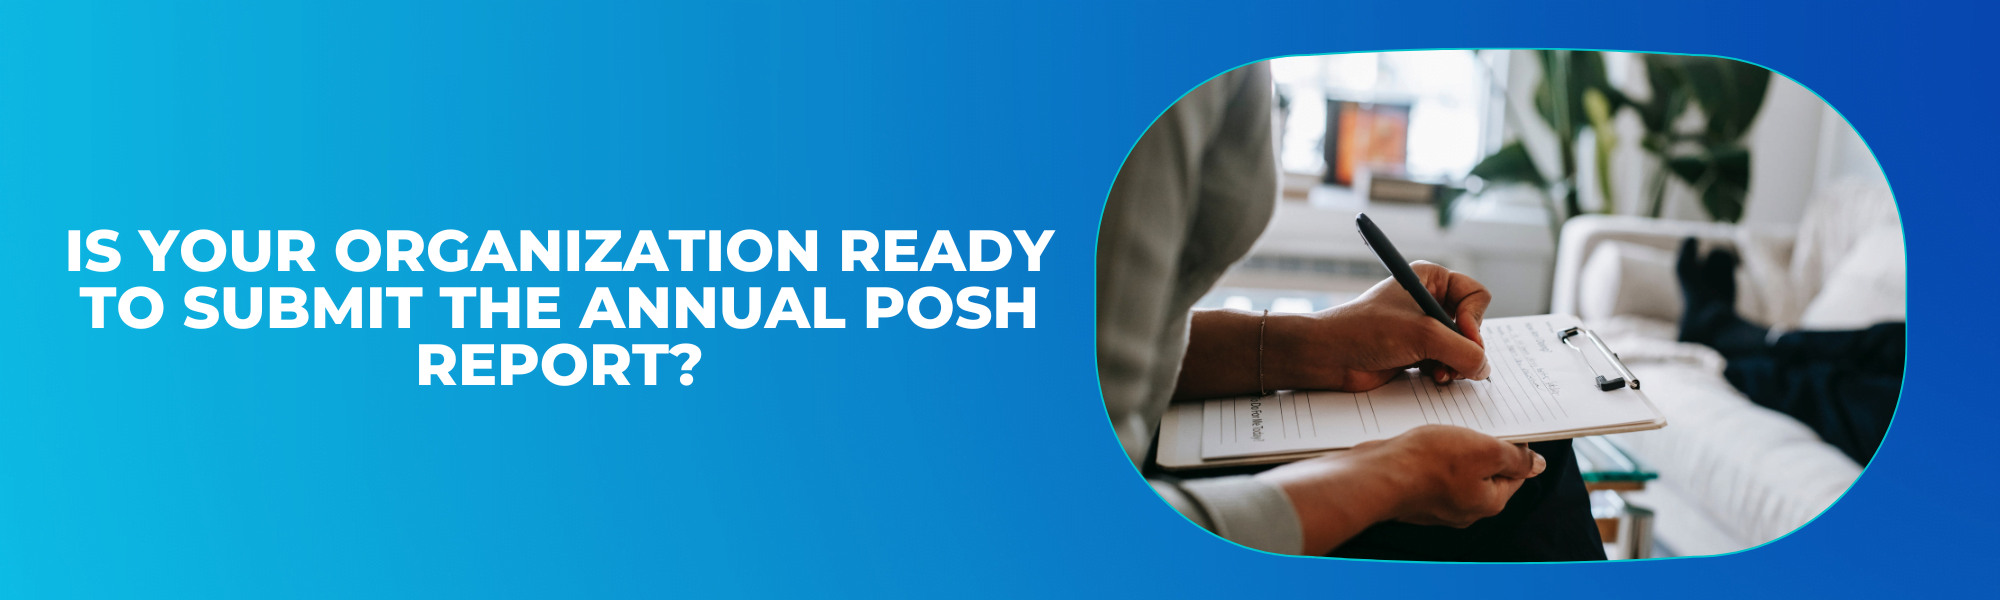 Is Your Organization Ready to Submit The Annual POSH Report?